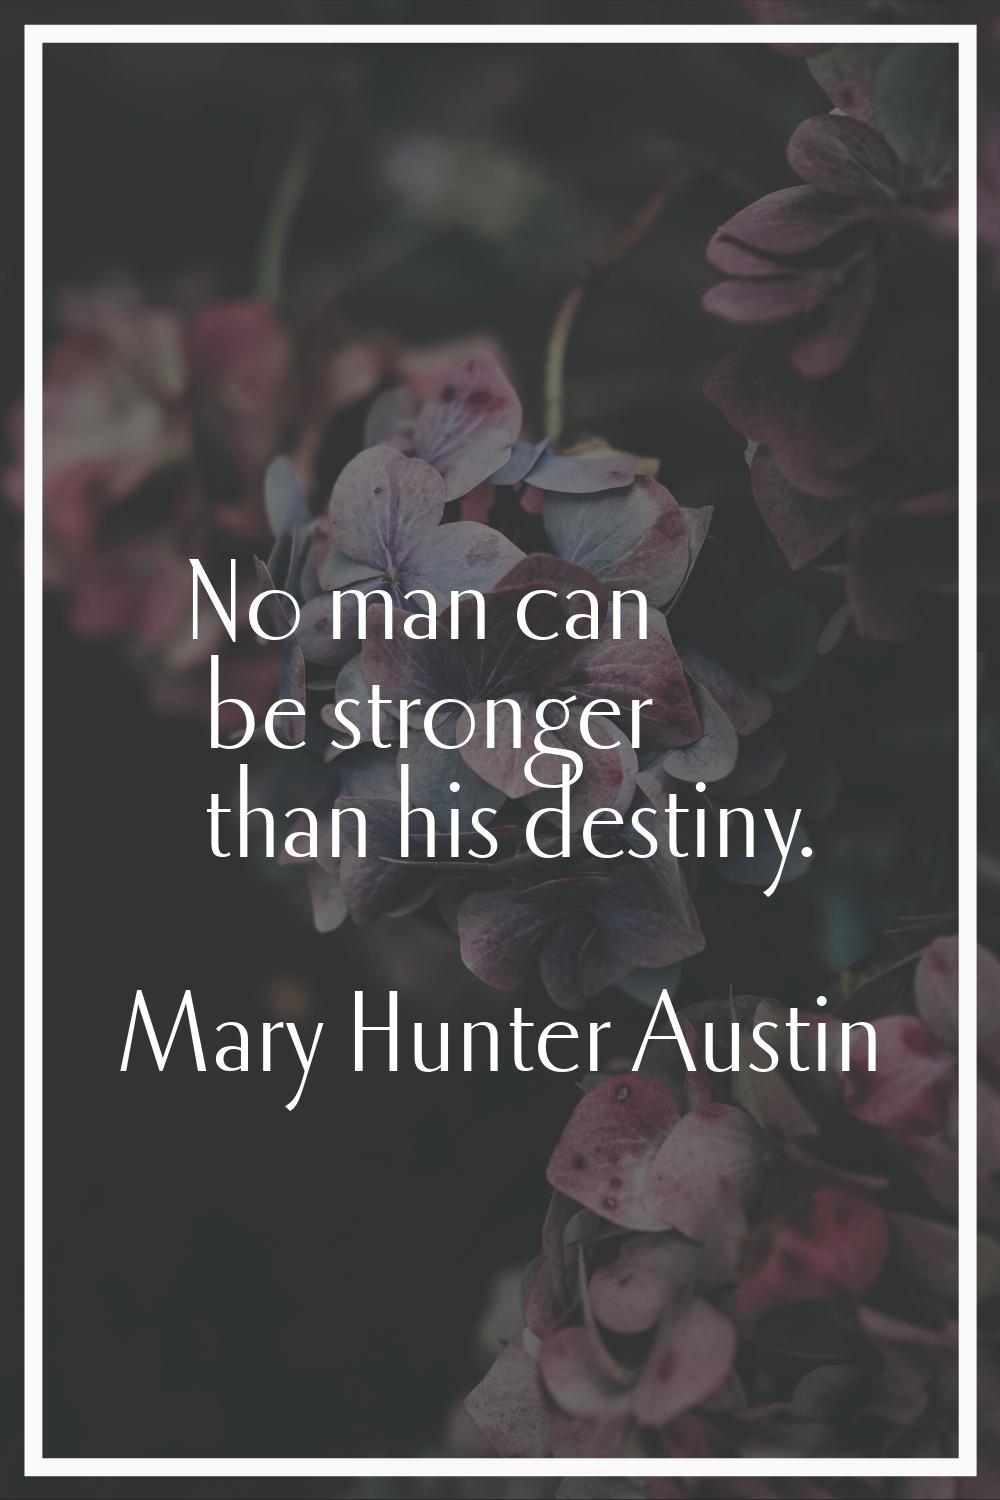 No man can be stronger than his destiny.